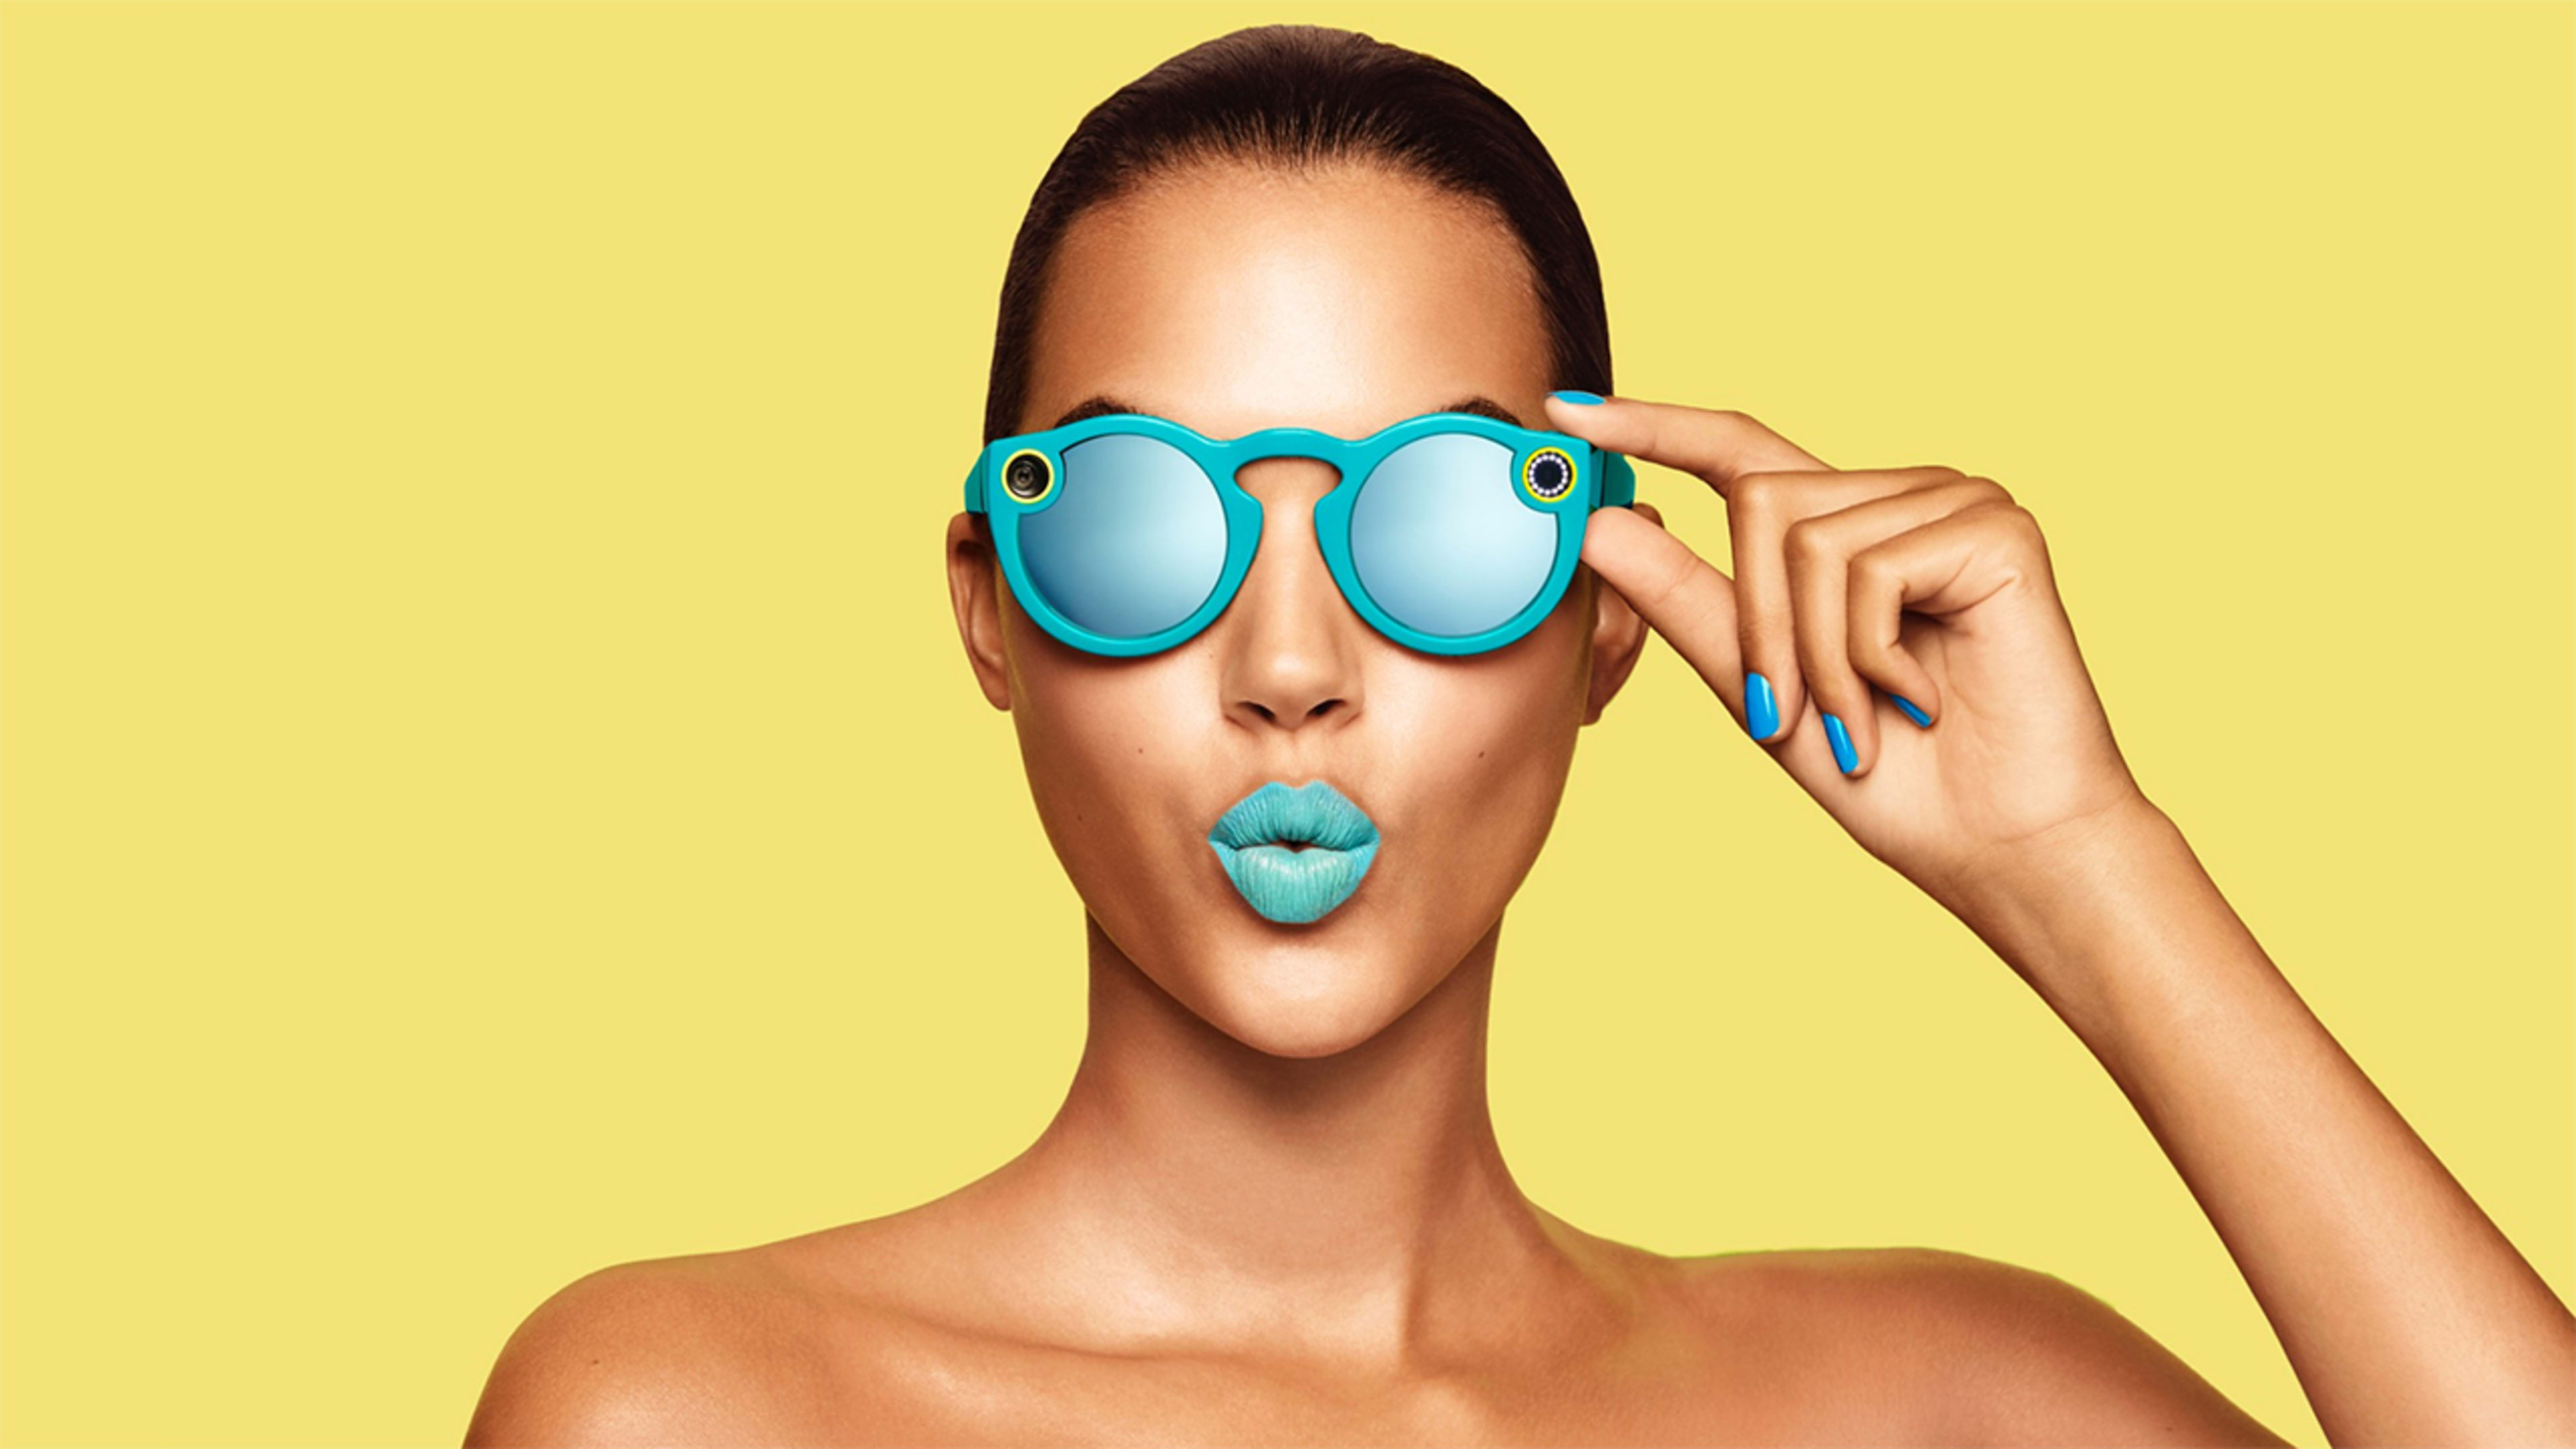 Snapchat’s Spectacles: How Digital Eyewear Could Escape The Nerd Factor